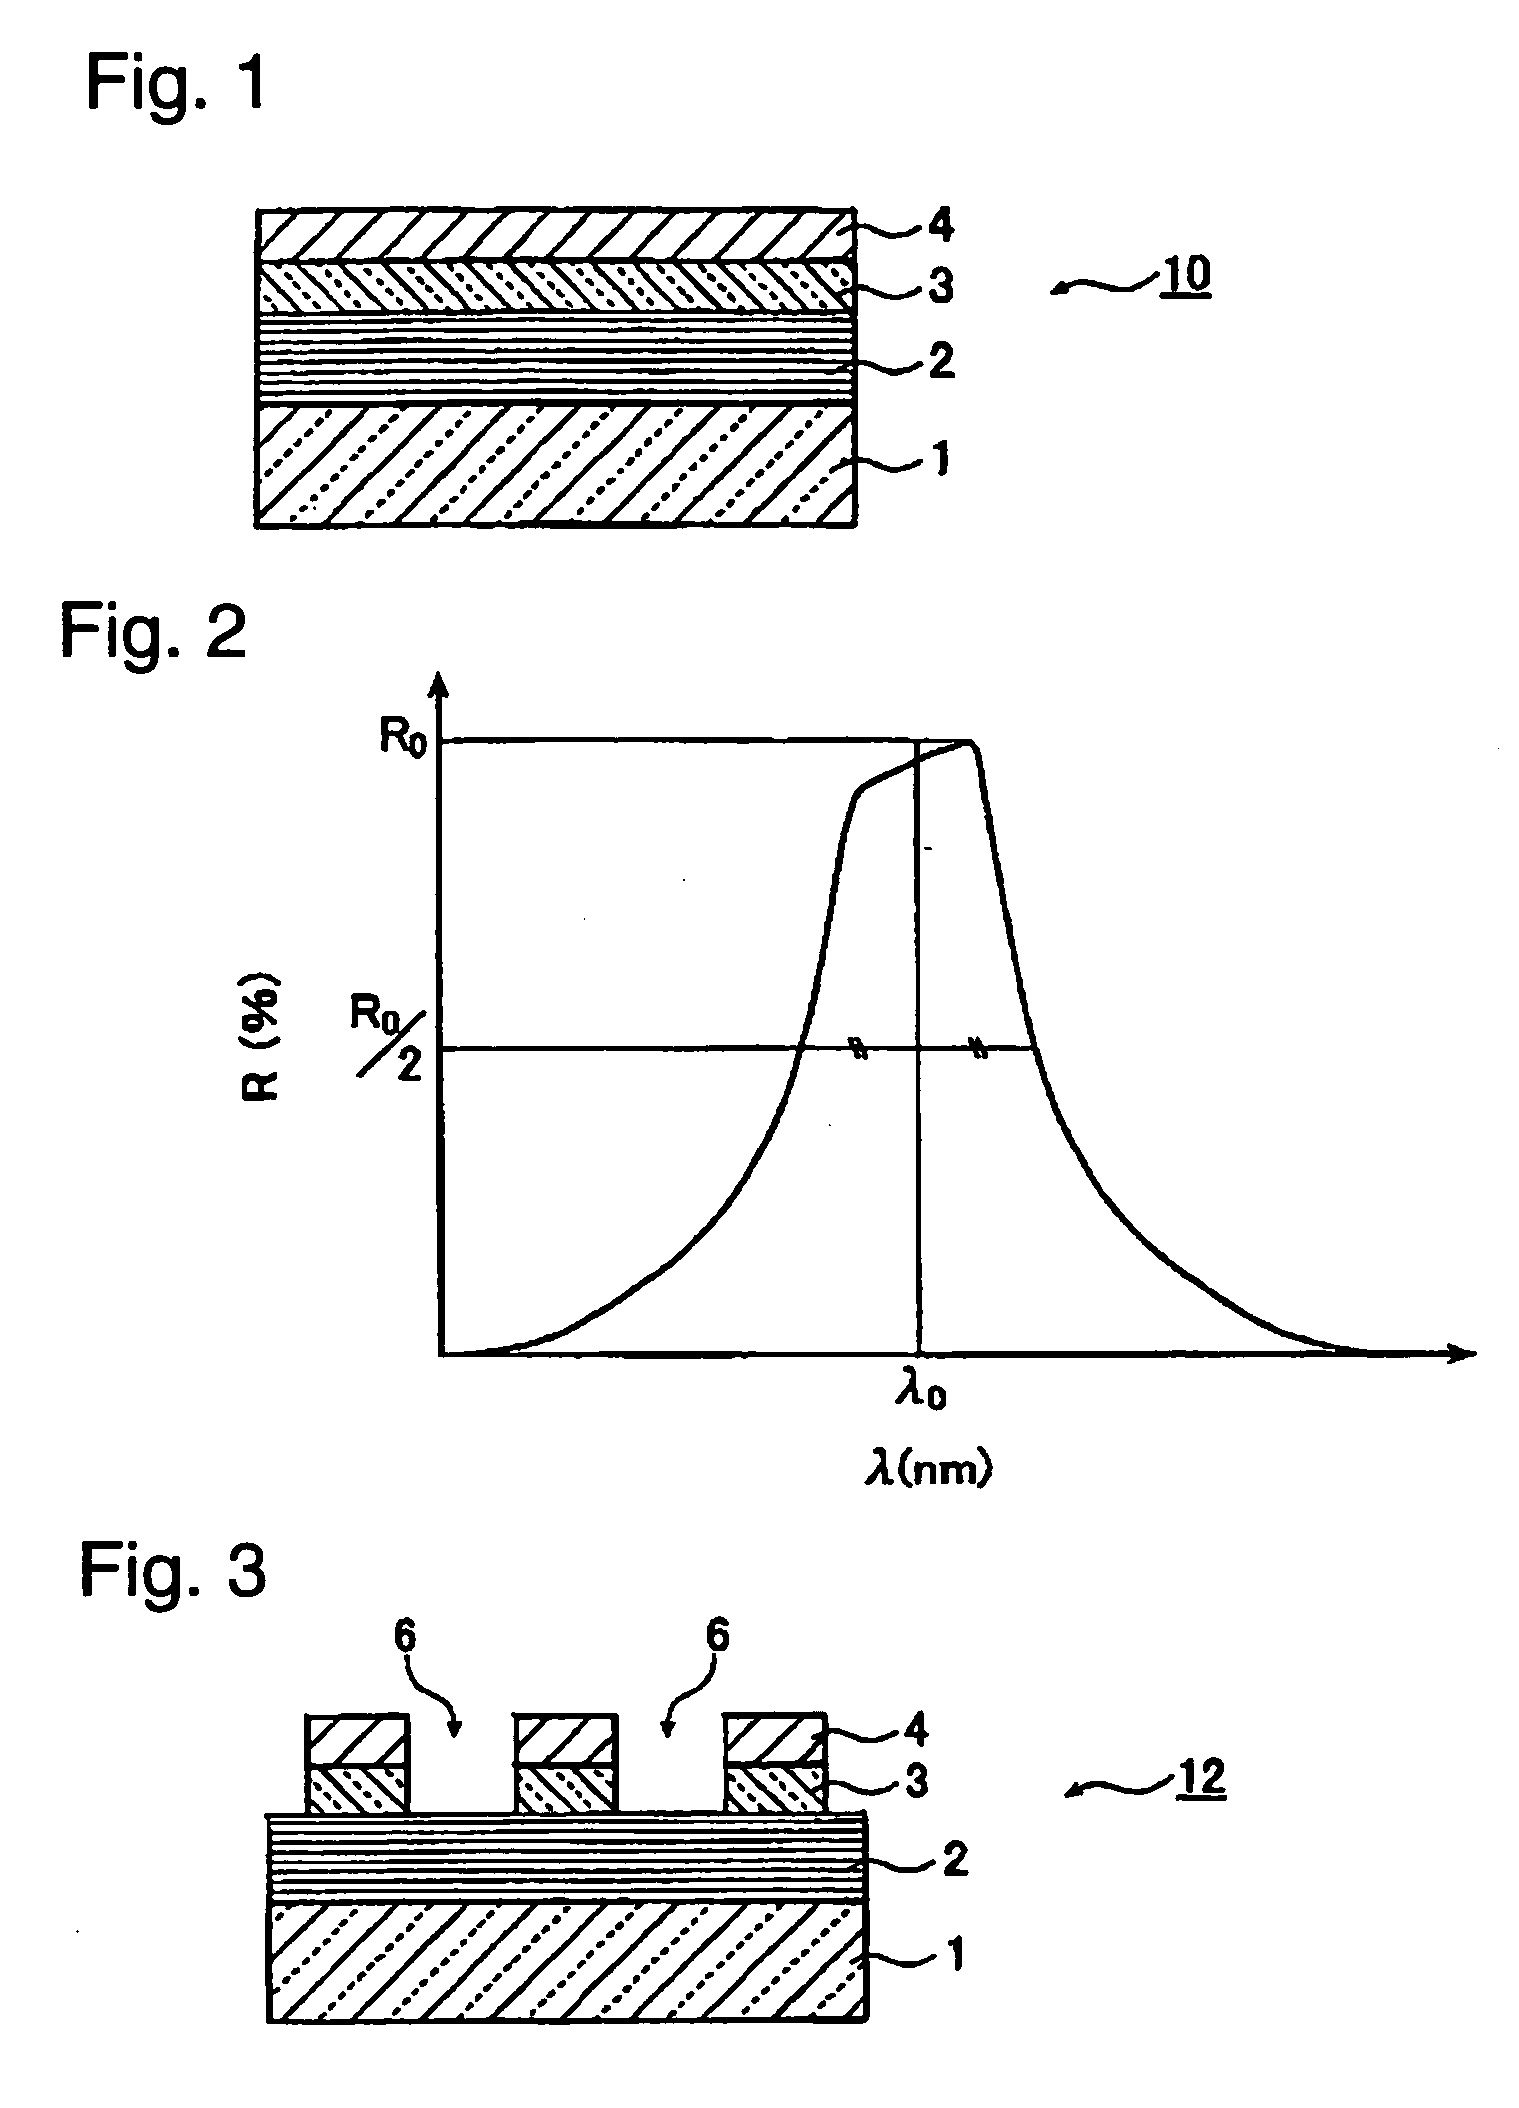 Reflective-type mask blank for EUV lithography and method for producing the same